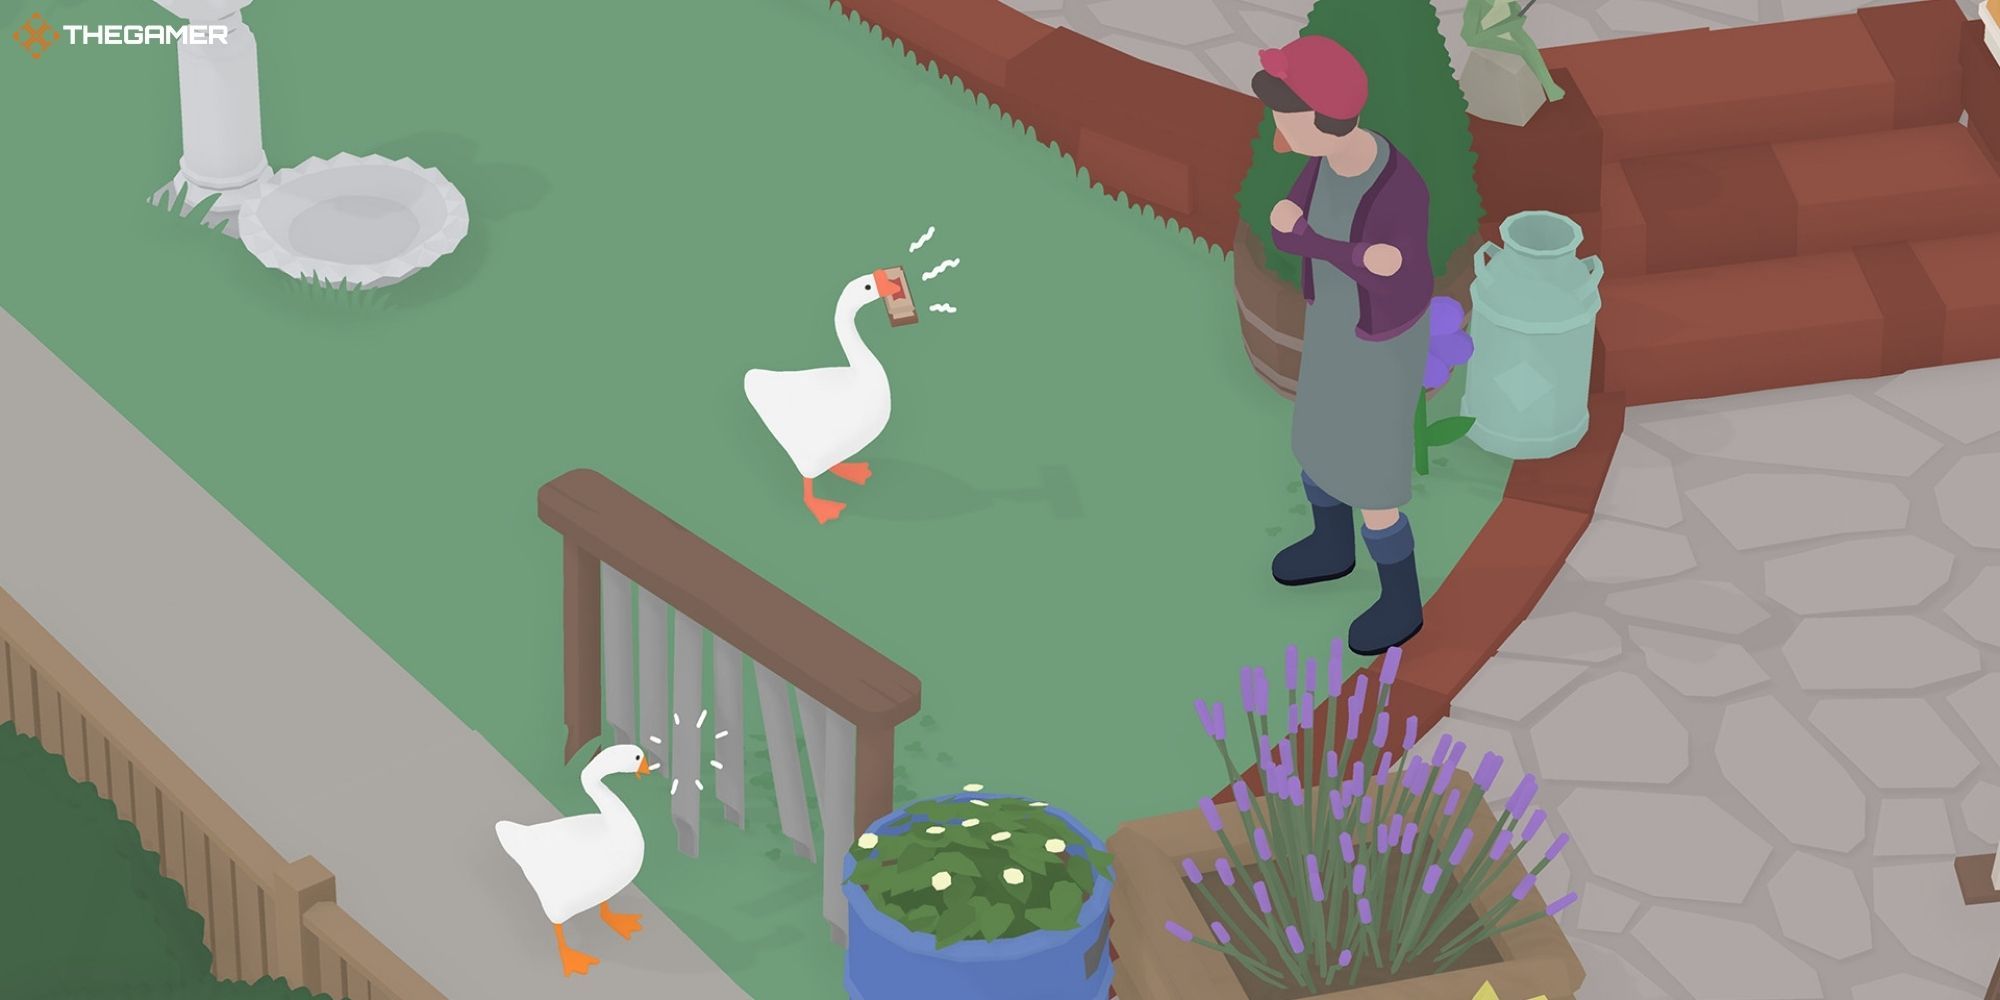 Untitled Goose Game - Geese disturb a woman